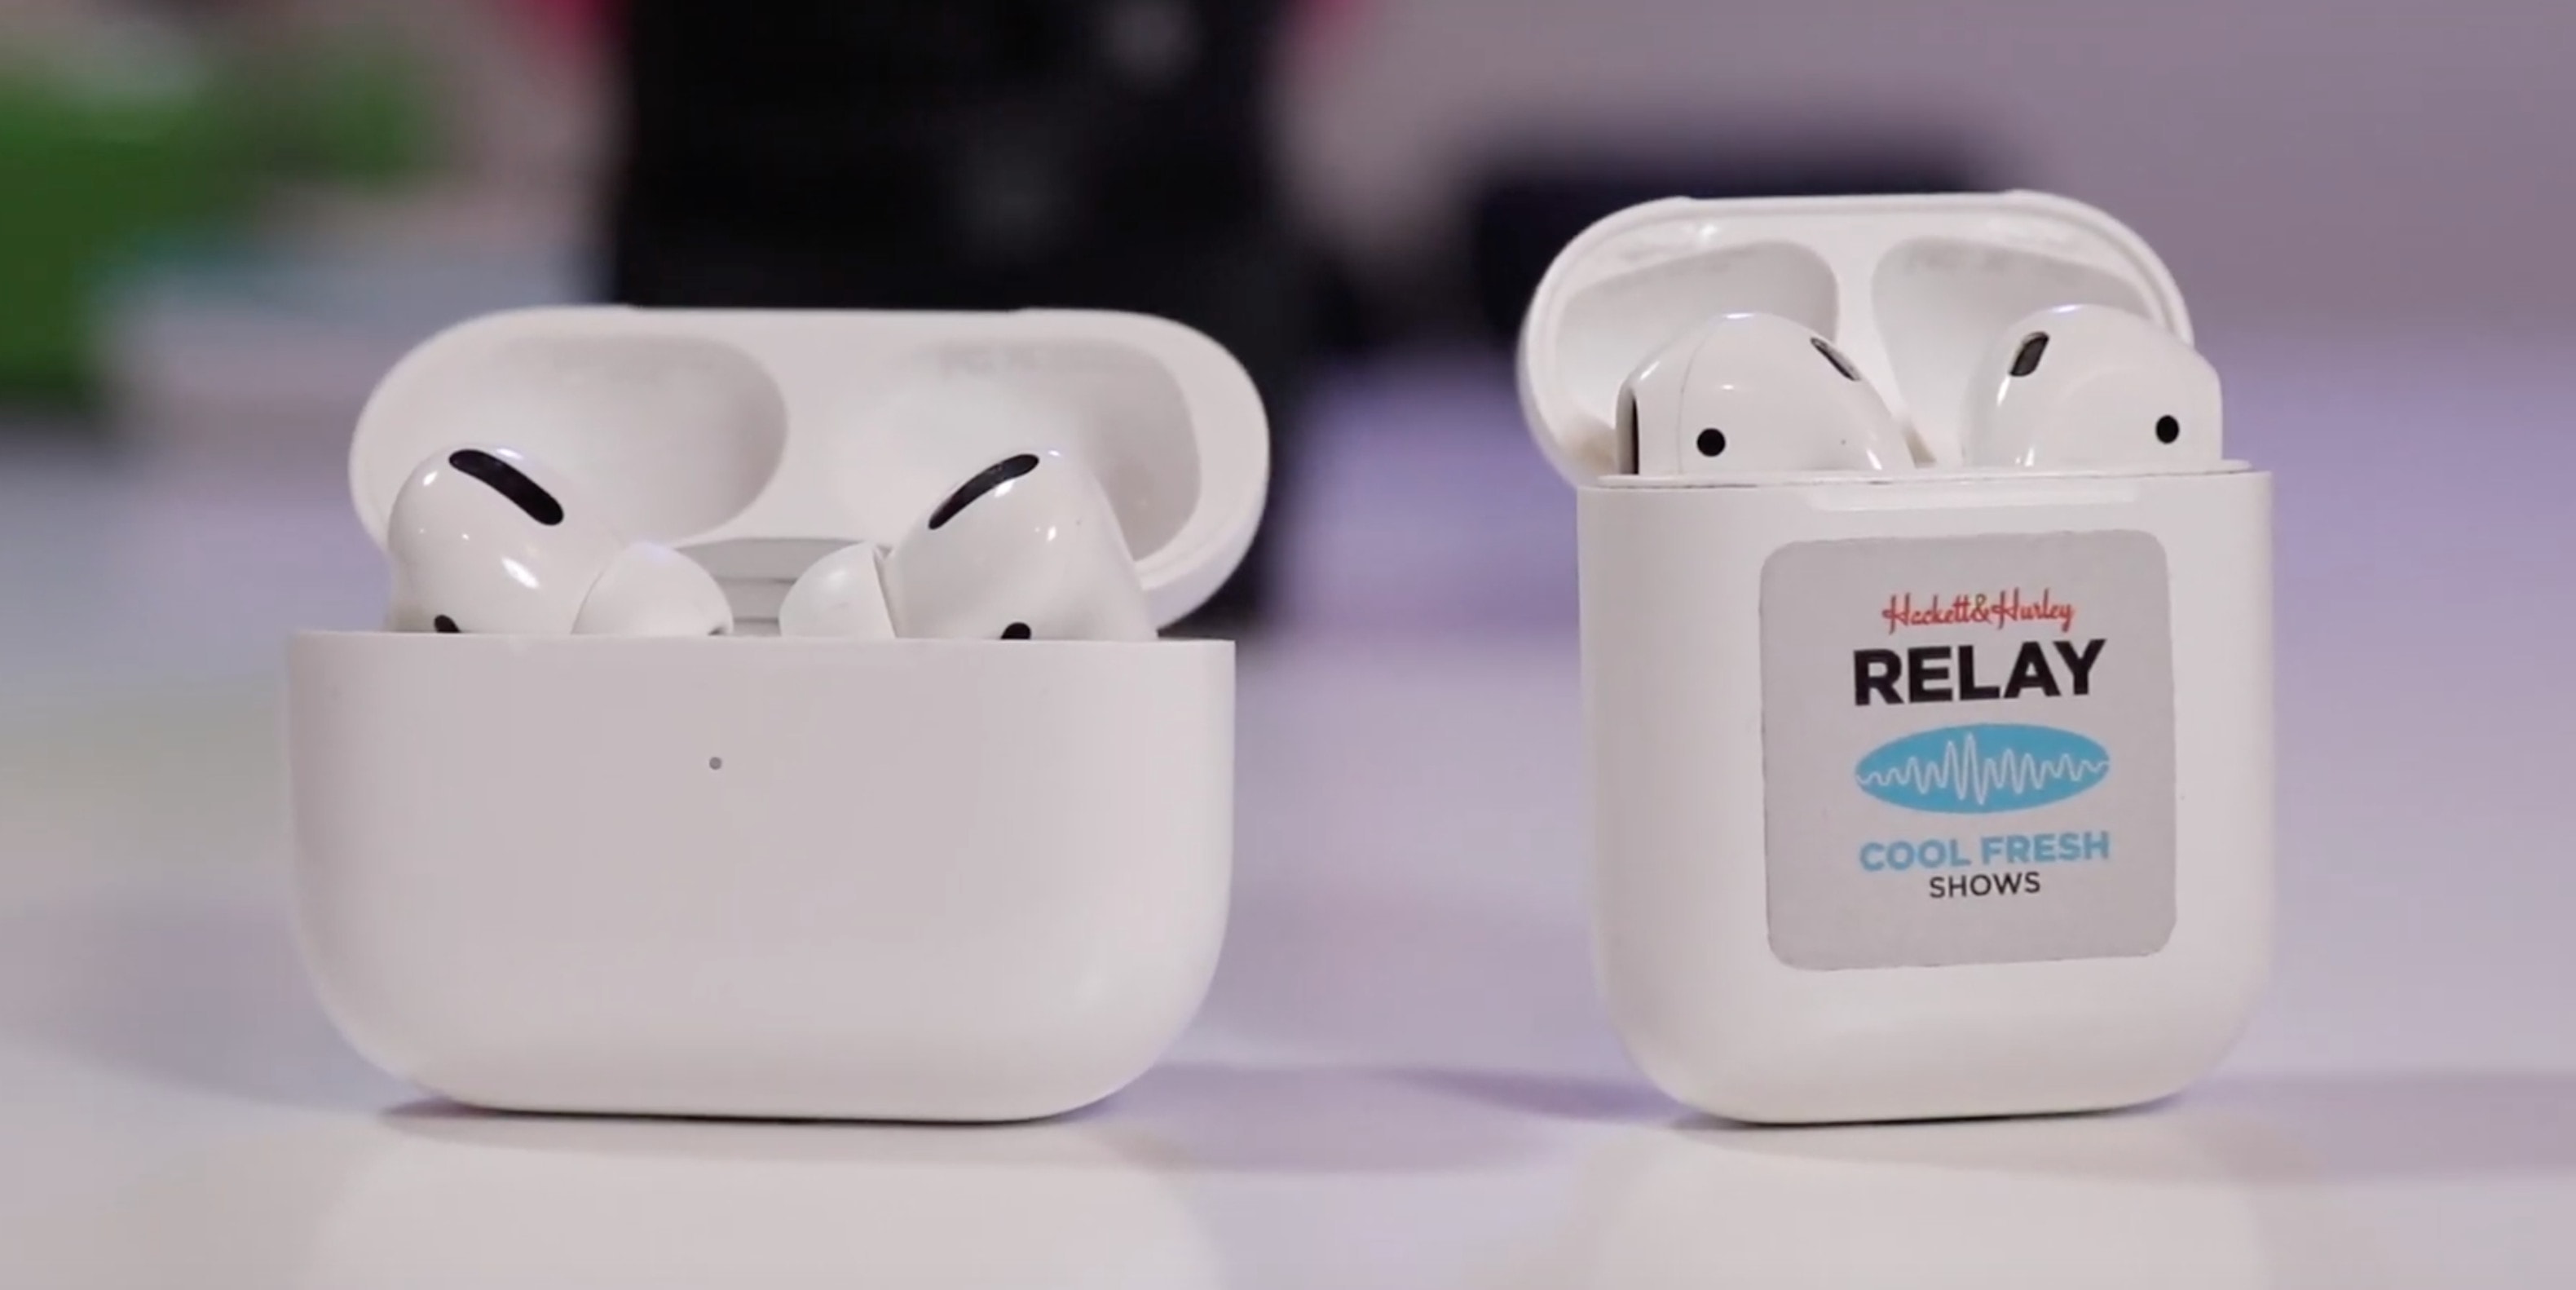 AirPods vs. AirPods Pro: Which is better? Feature-packed, or sleek and simple?